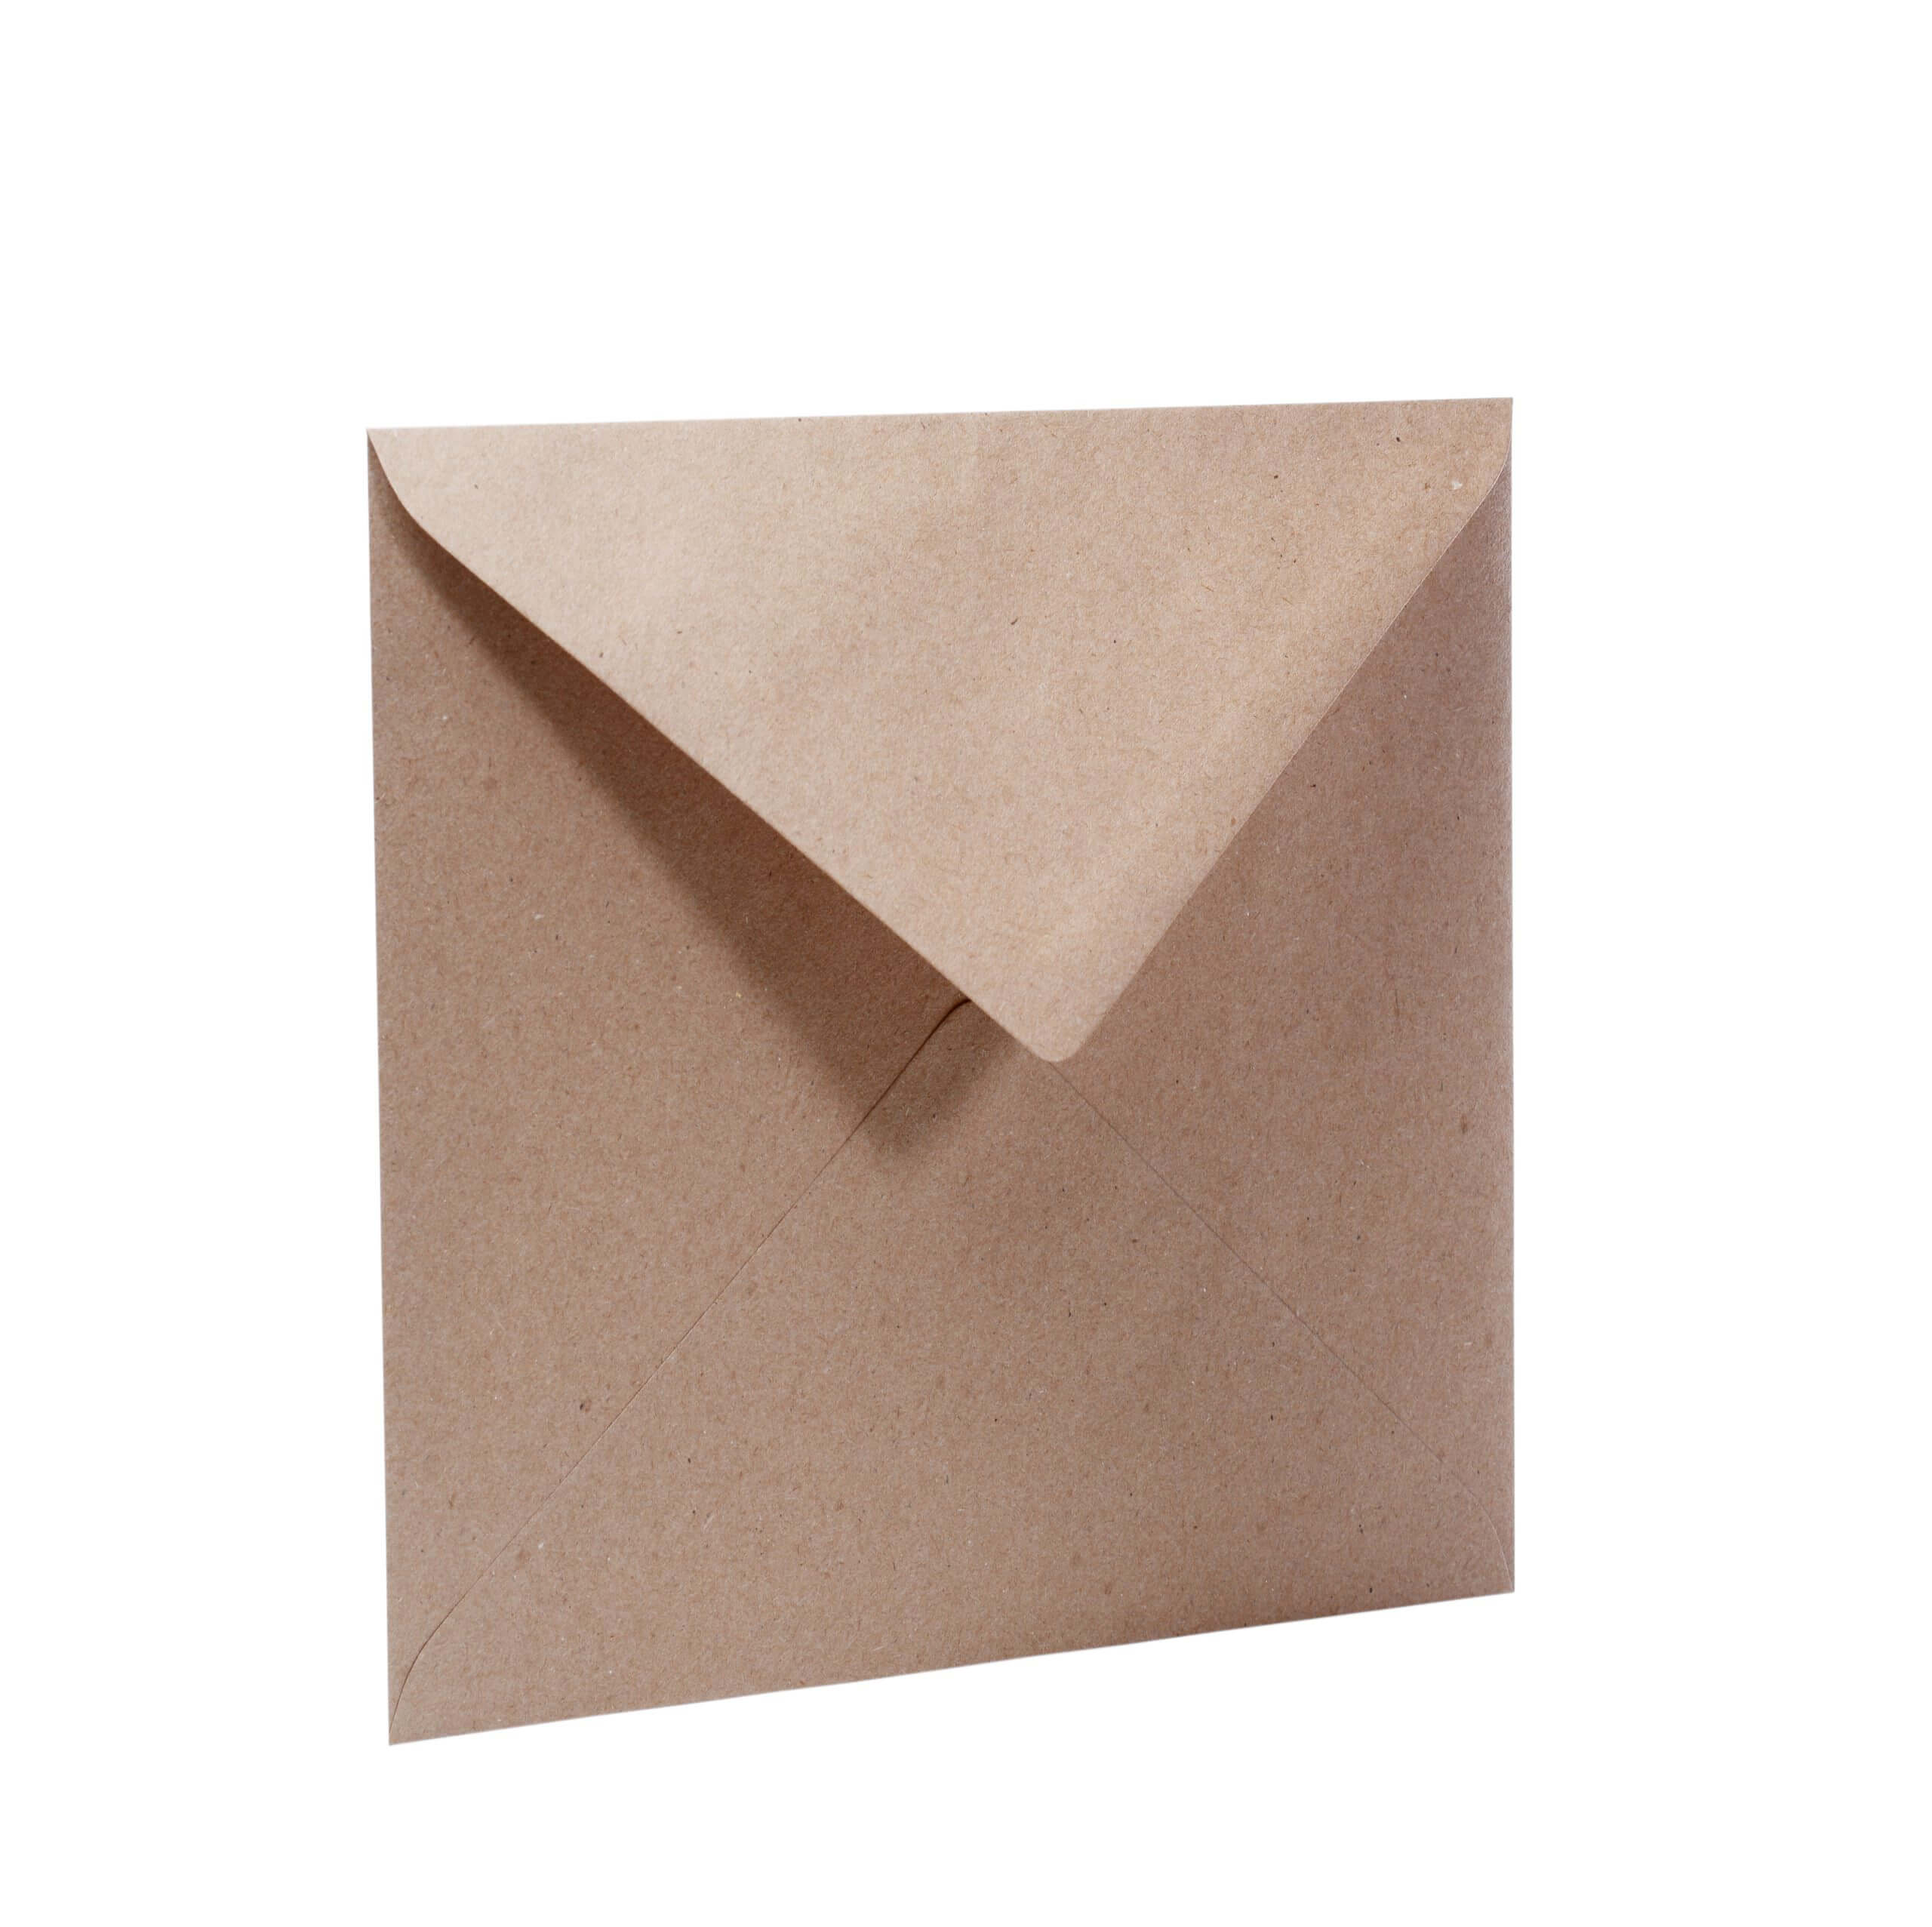 An image of one of our Adhesive Envelopes.